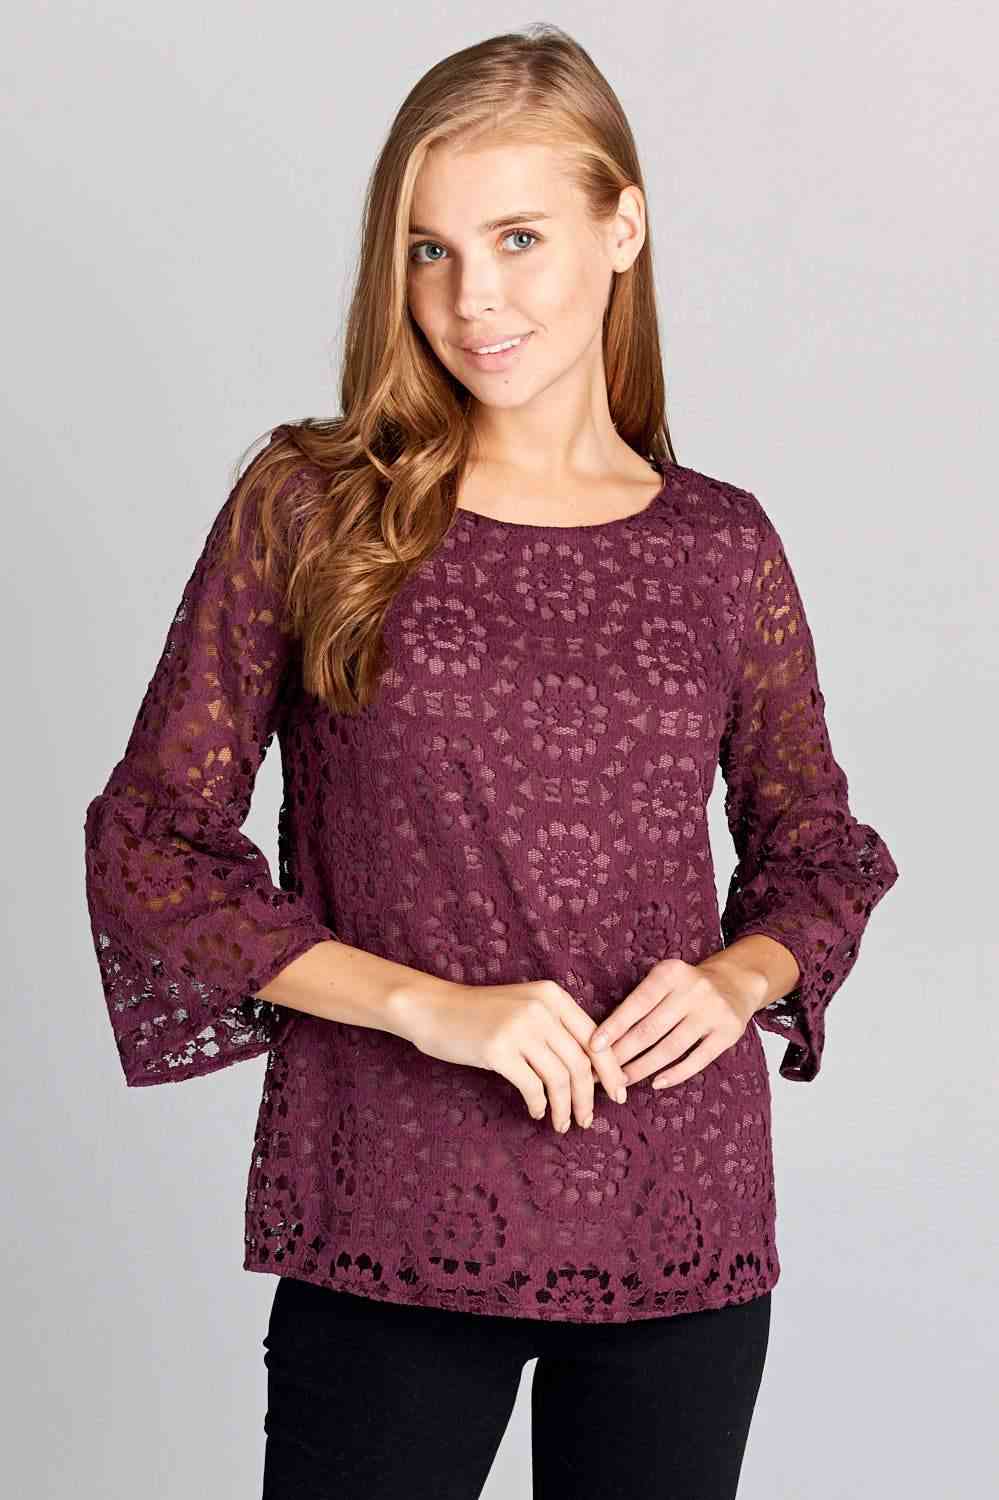 Patterned Knit Lace Top